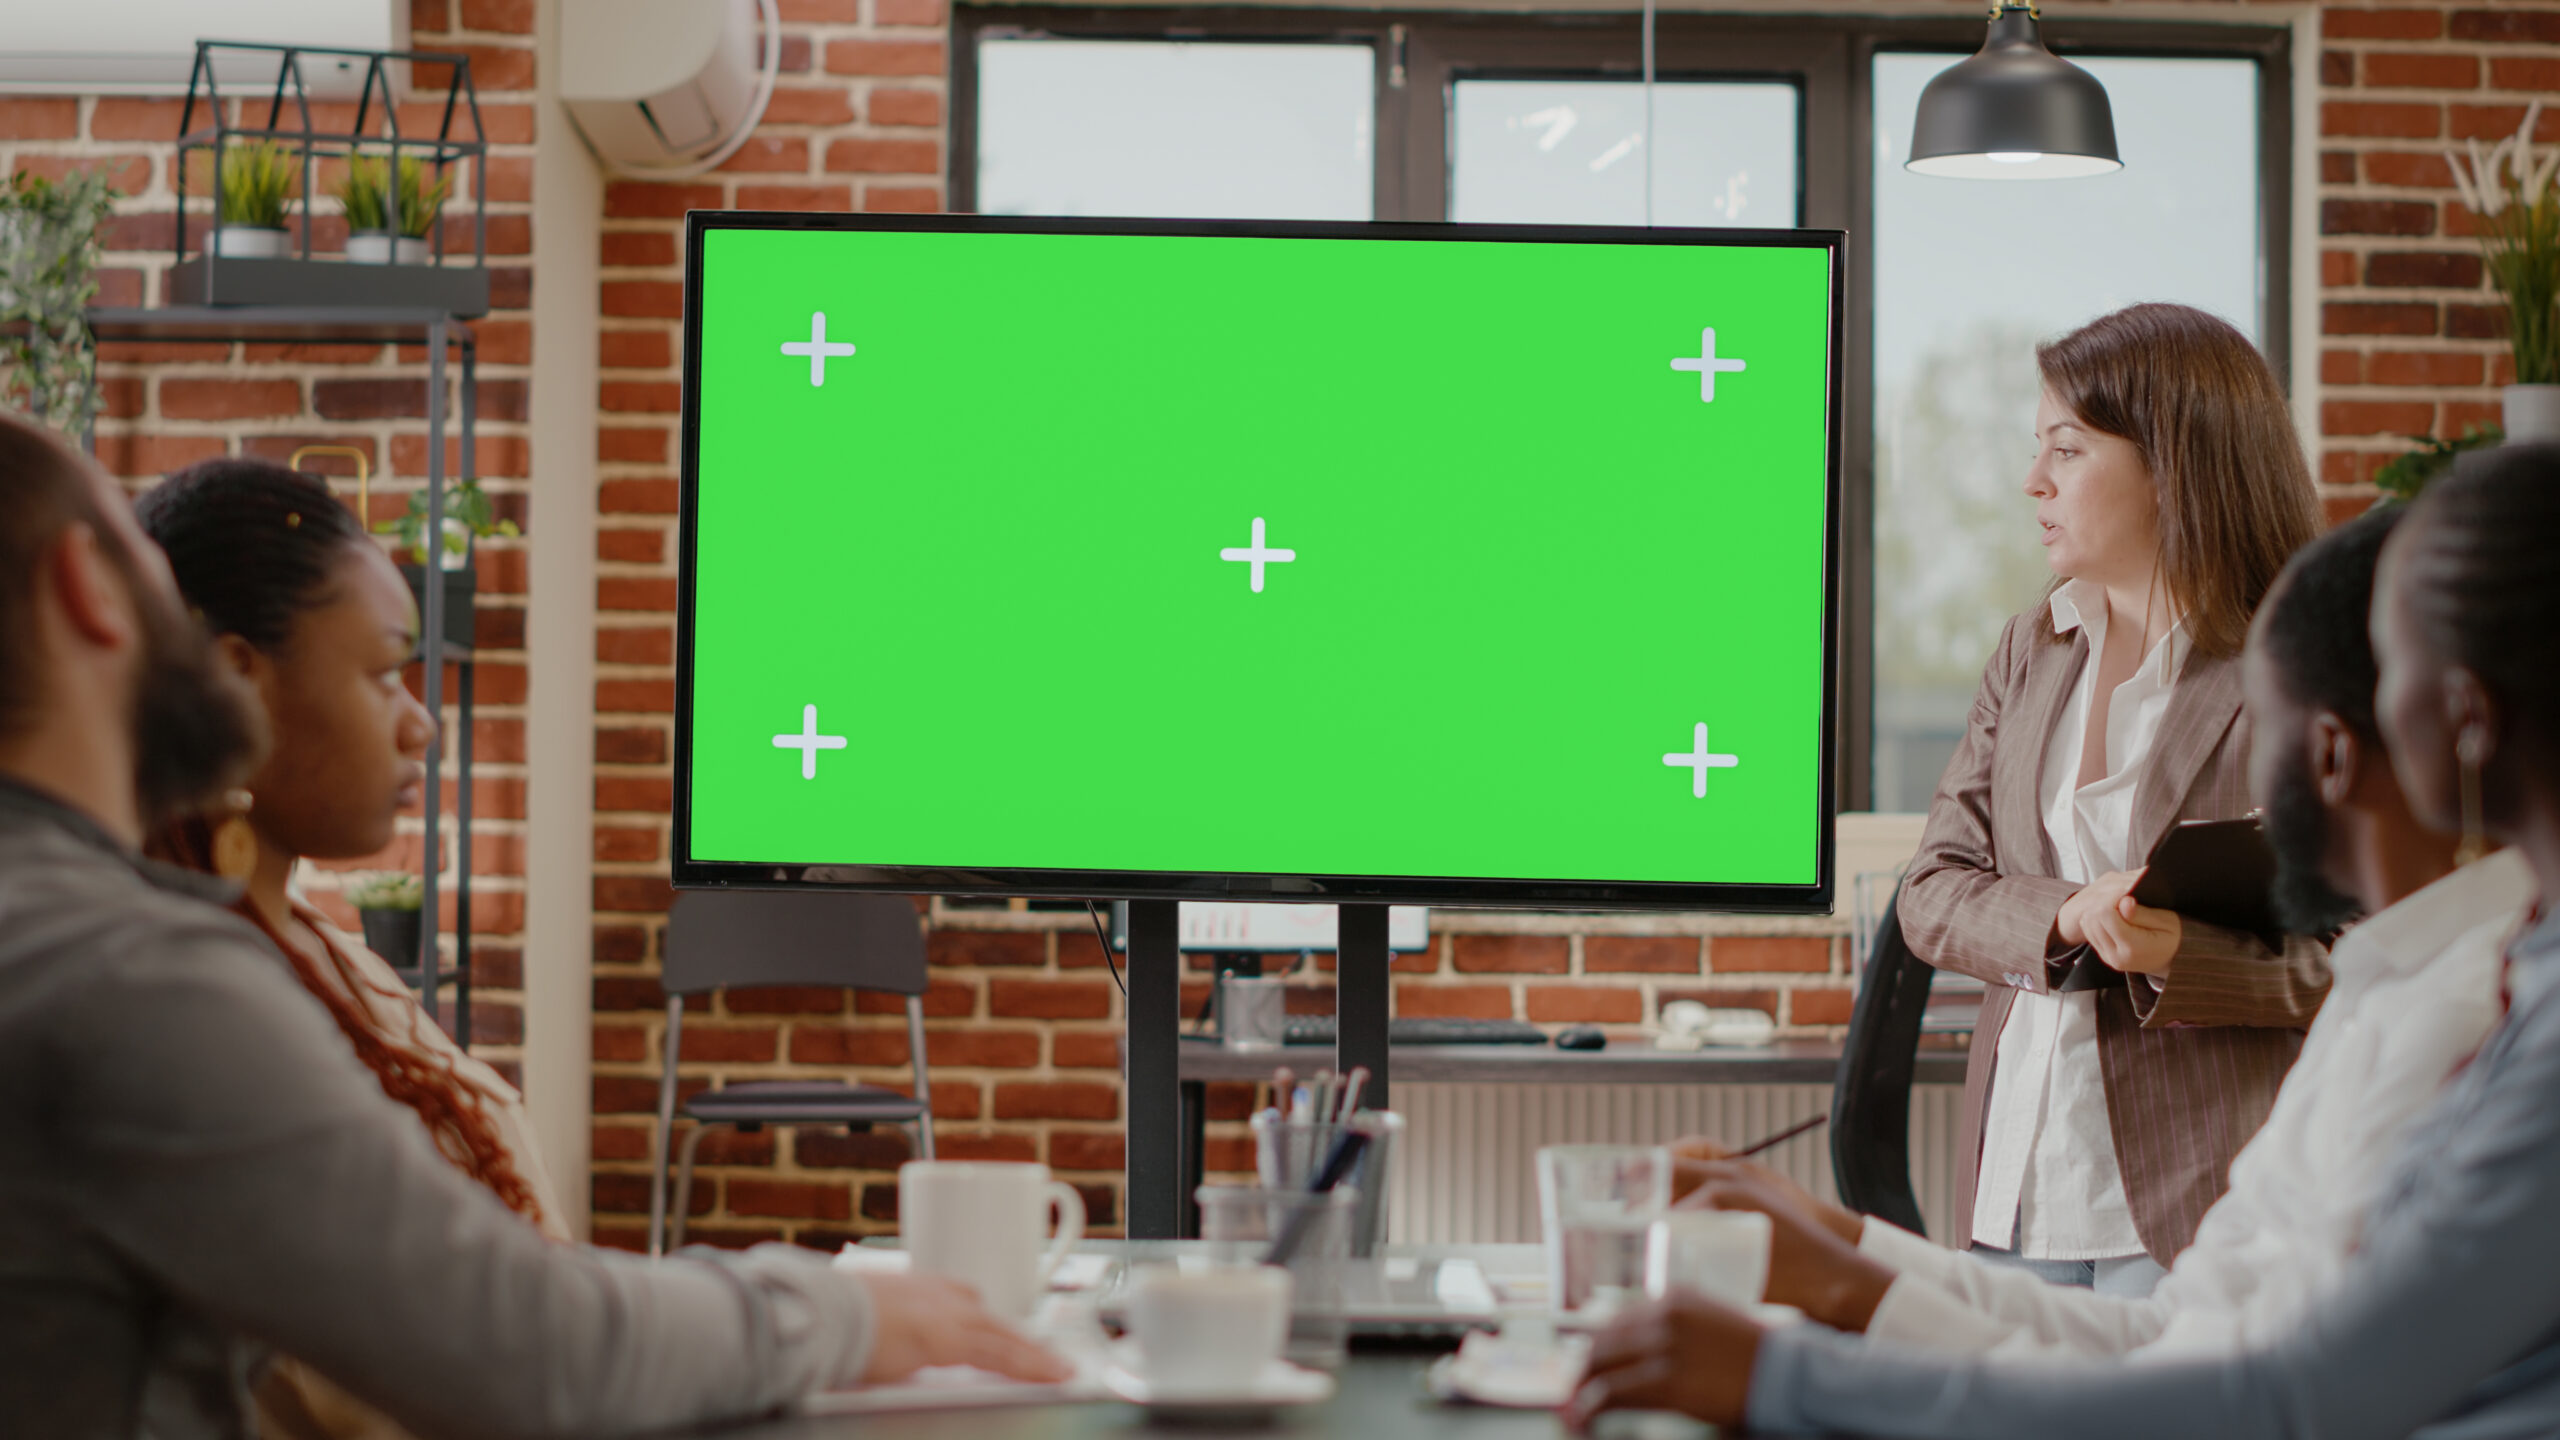 Diverse business people looking at green screen on monitor display